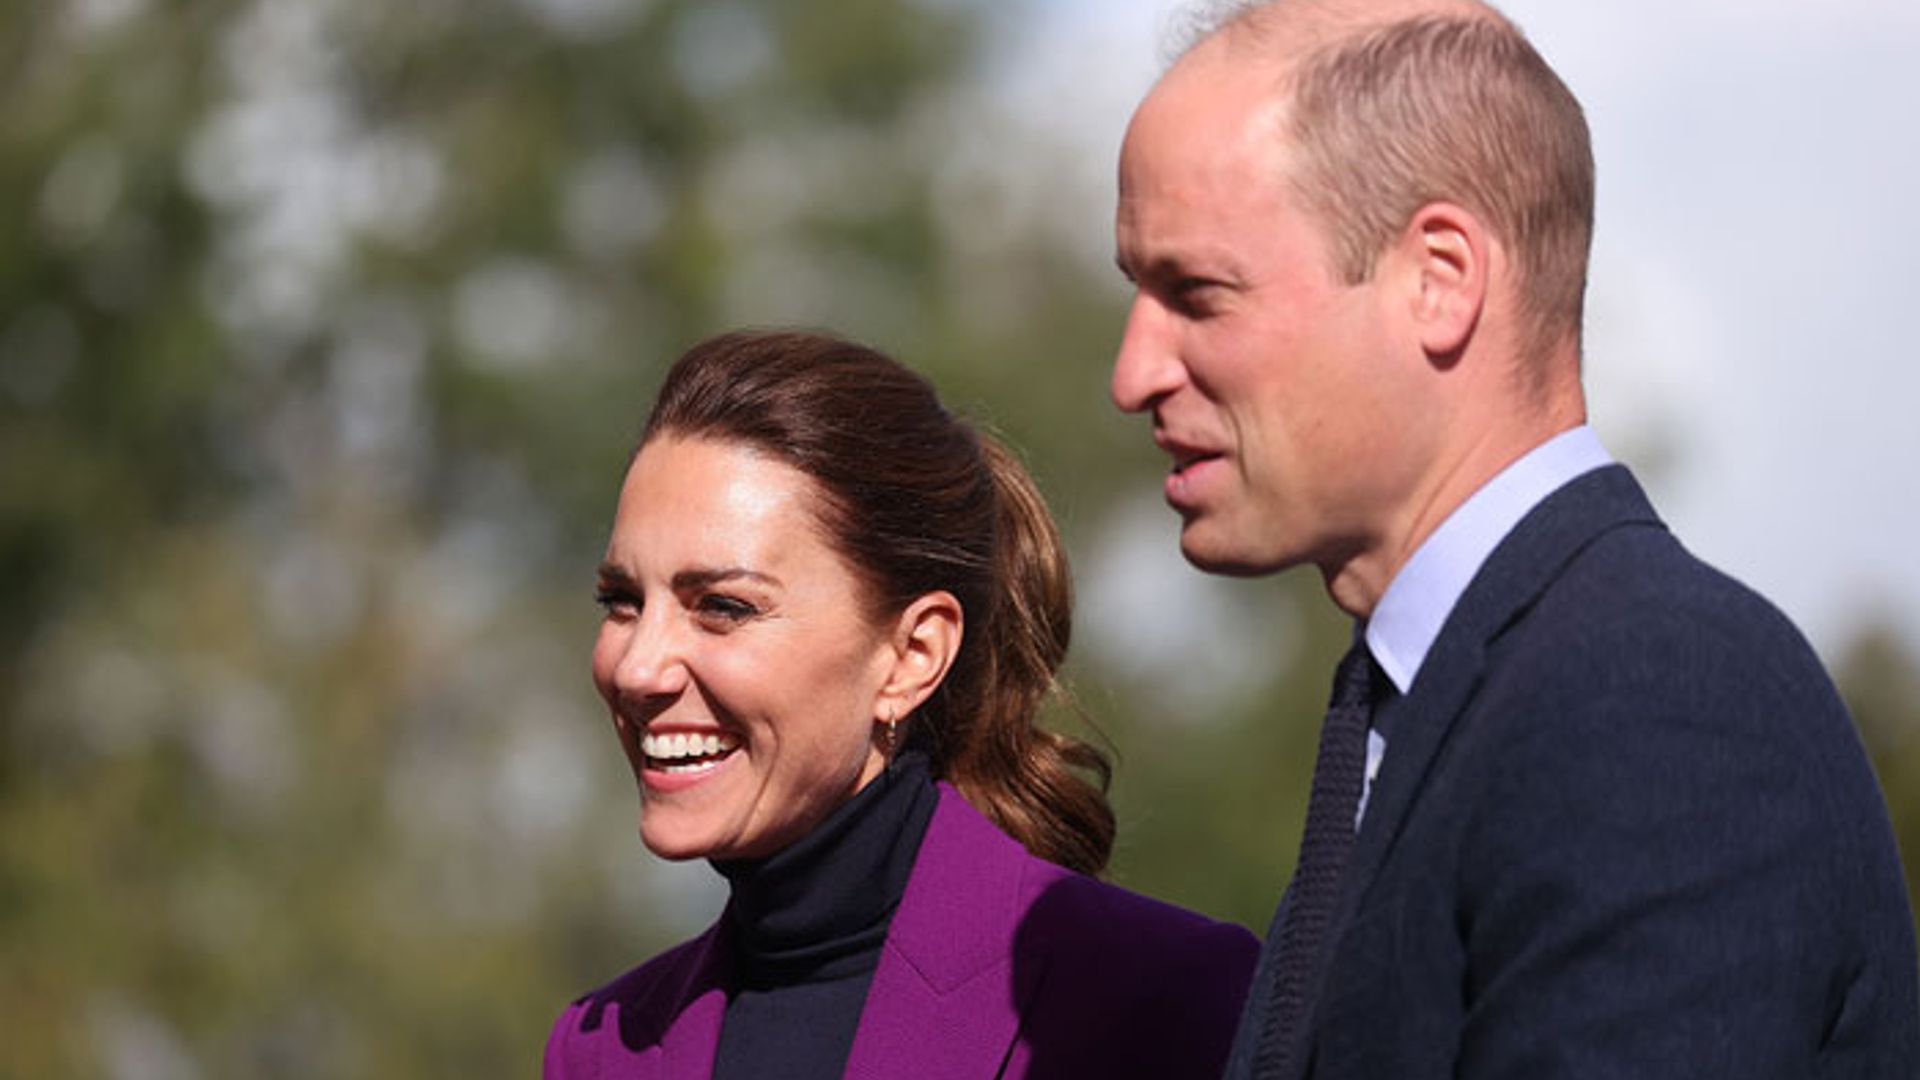 Prince William and Kate Middleton meet students in Northern Ireland after red carpet appearance - best photos